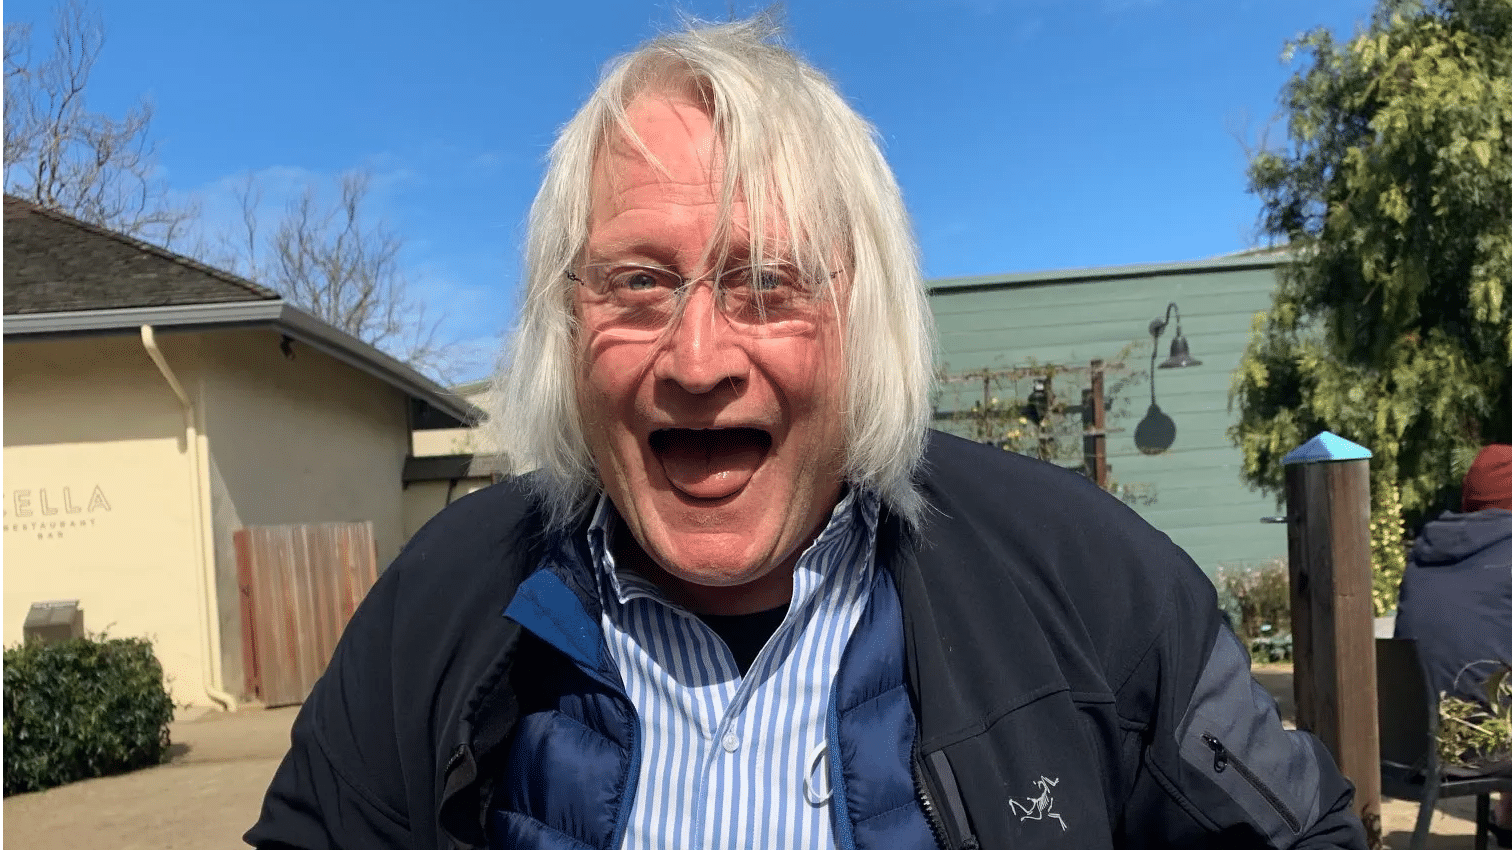 Who is Charles Martinet?